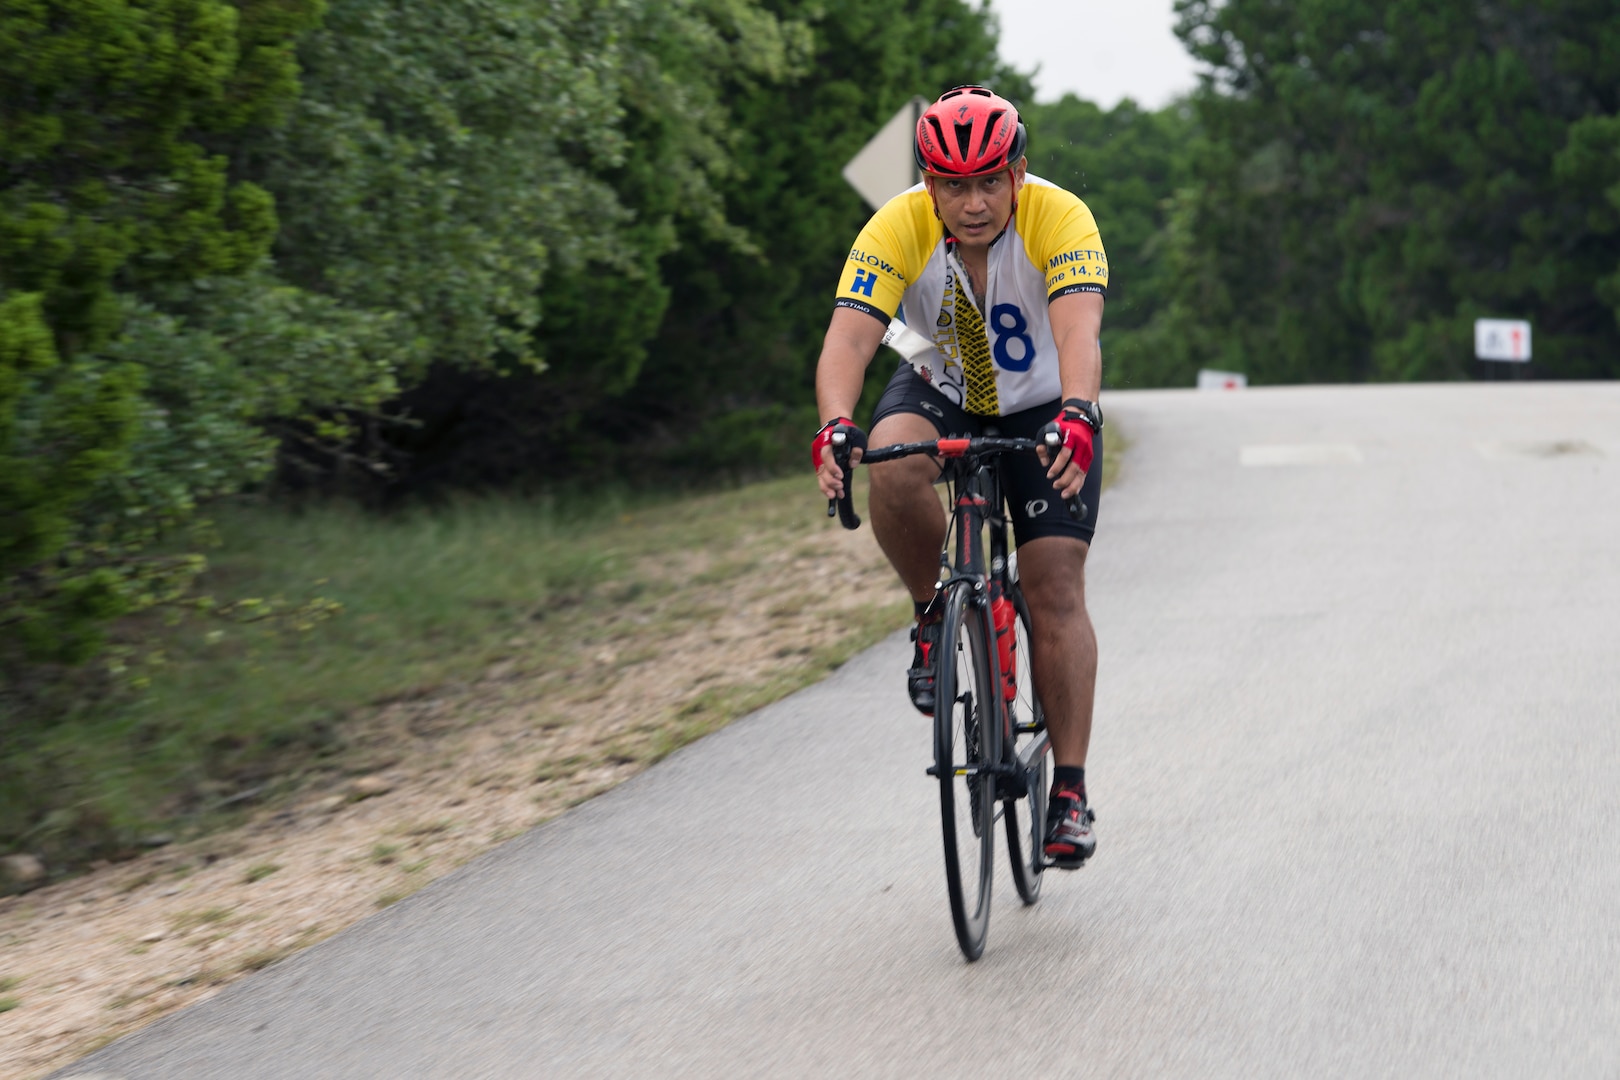 A member of Joint Base San Antonio raced on his bike during the Rambler 120 Oct. 13, 2018, at JBSA Recreation Area at Canyon Lake, Texas.